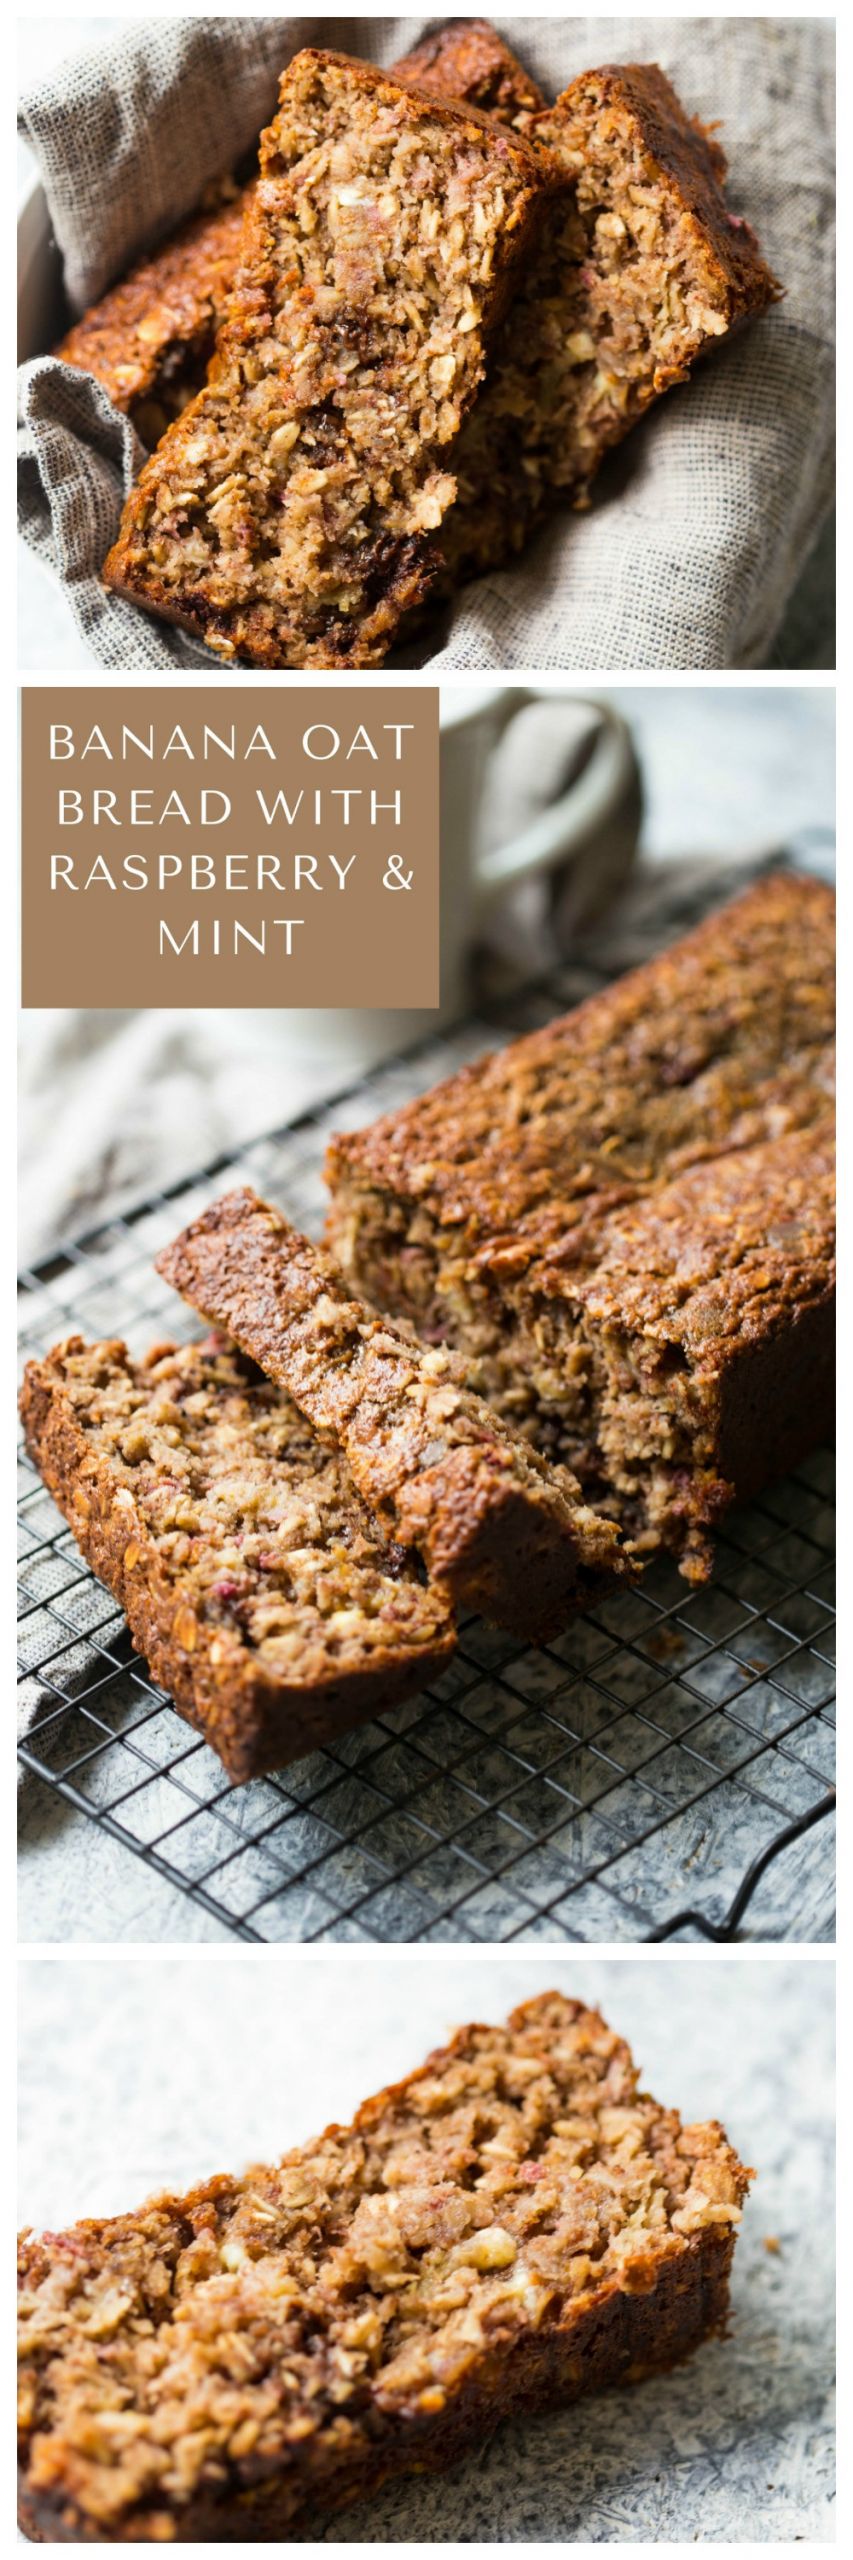 Gluten Free Banana Bread With Oats
 Old Fashioned Oat Banana Bread with Raspberry and Mint